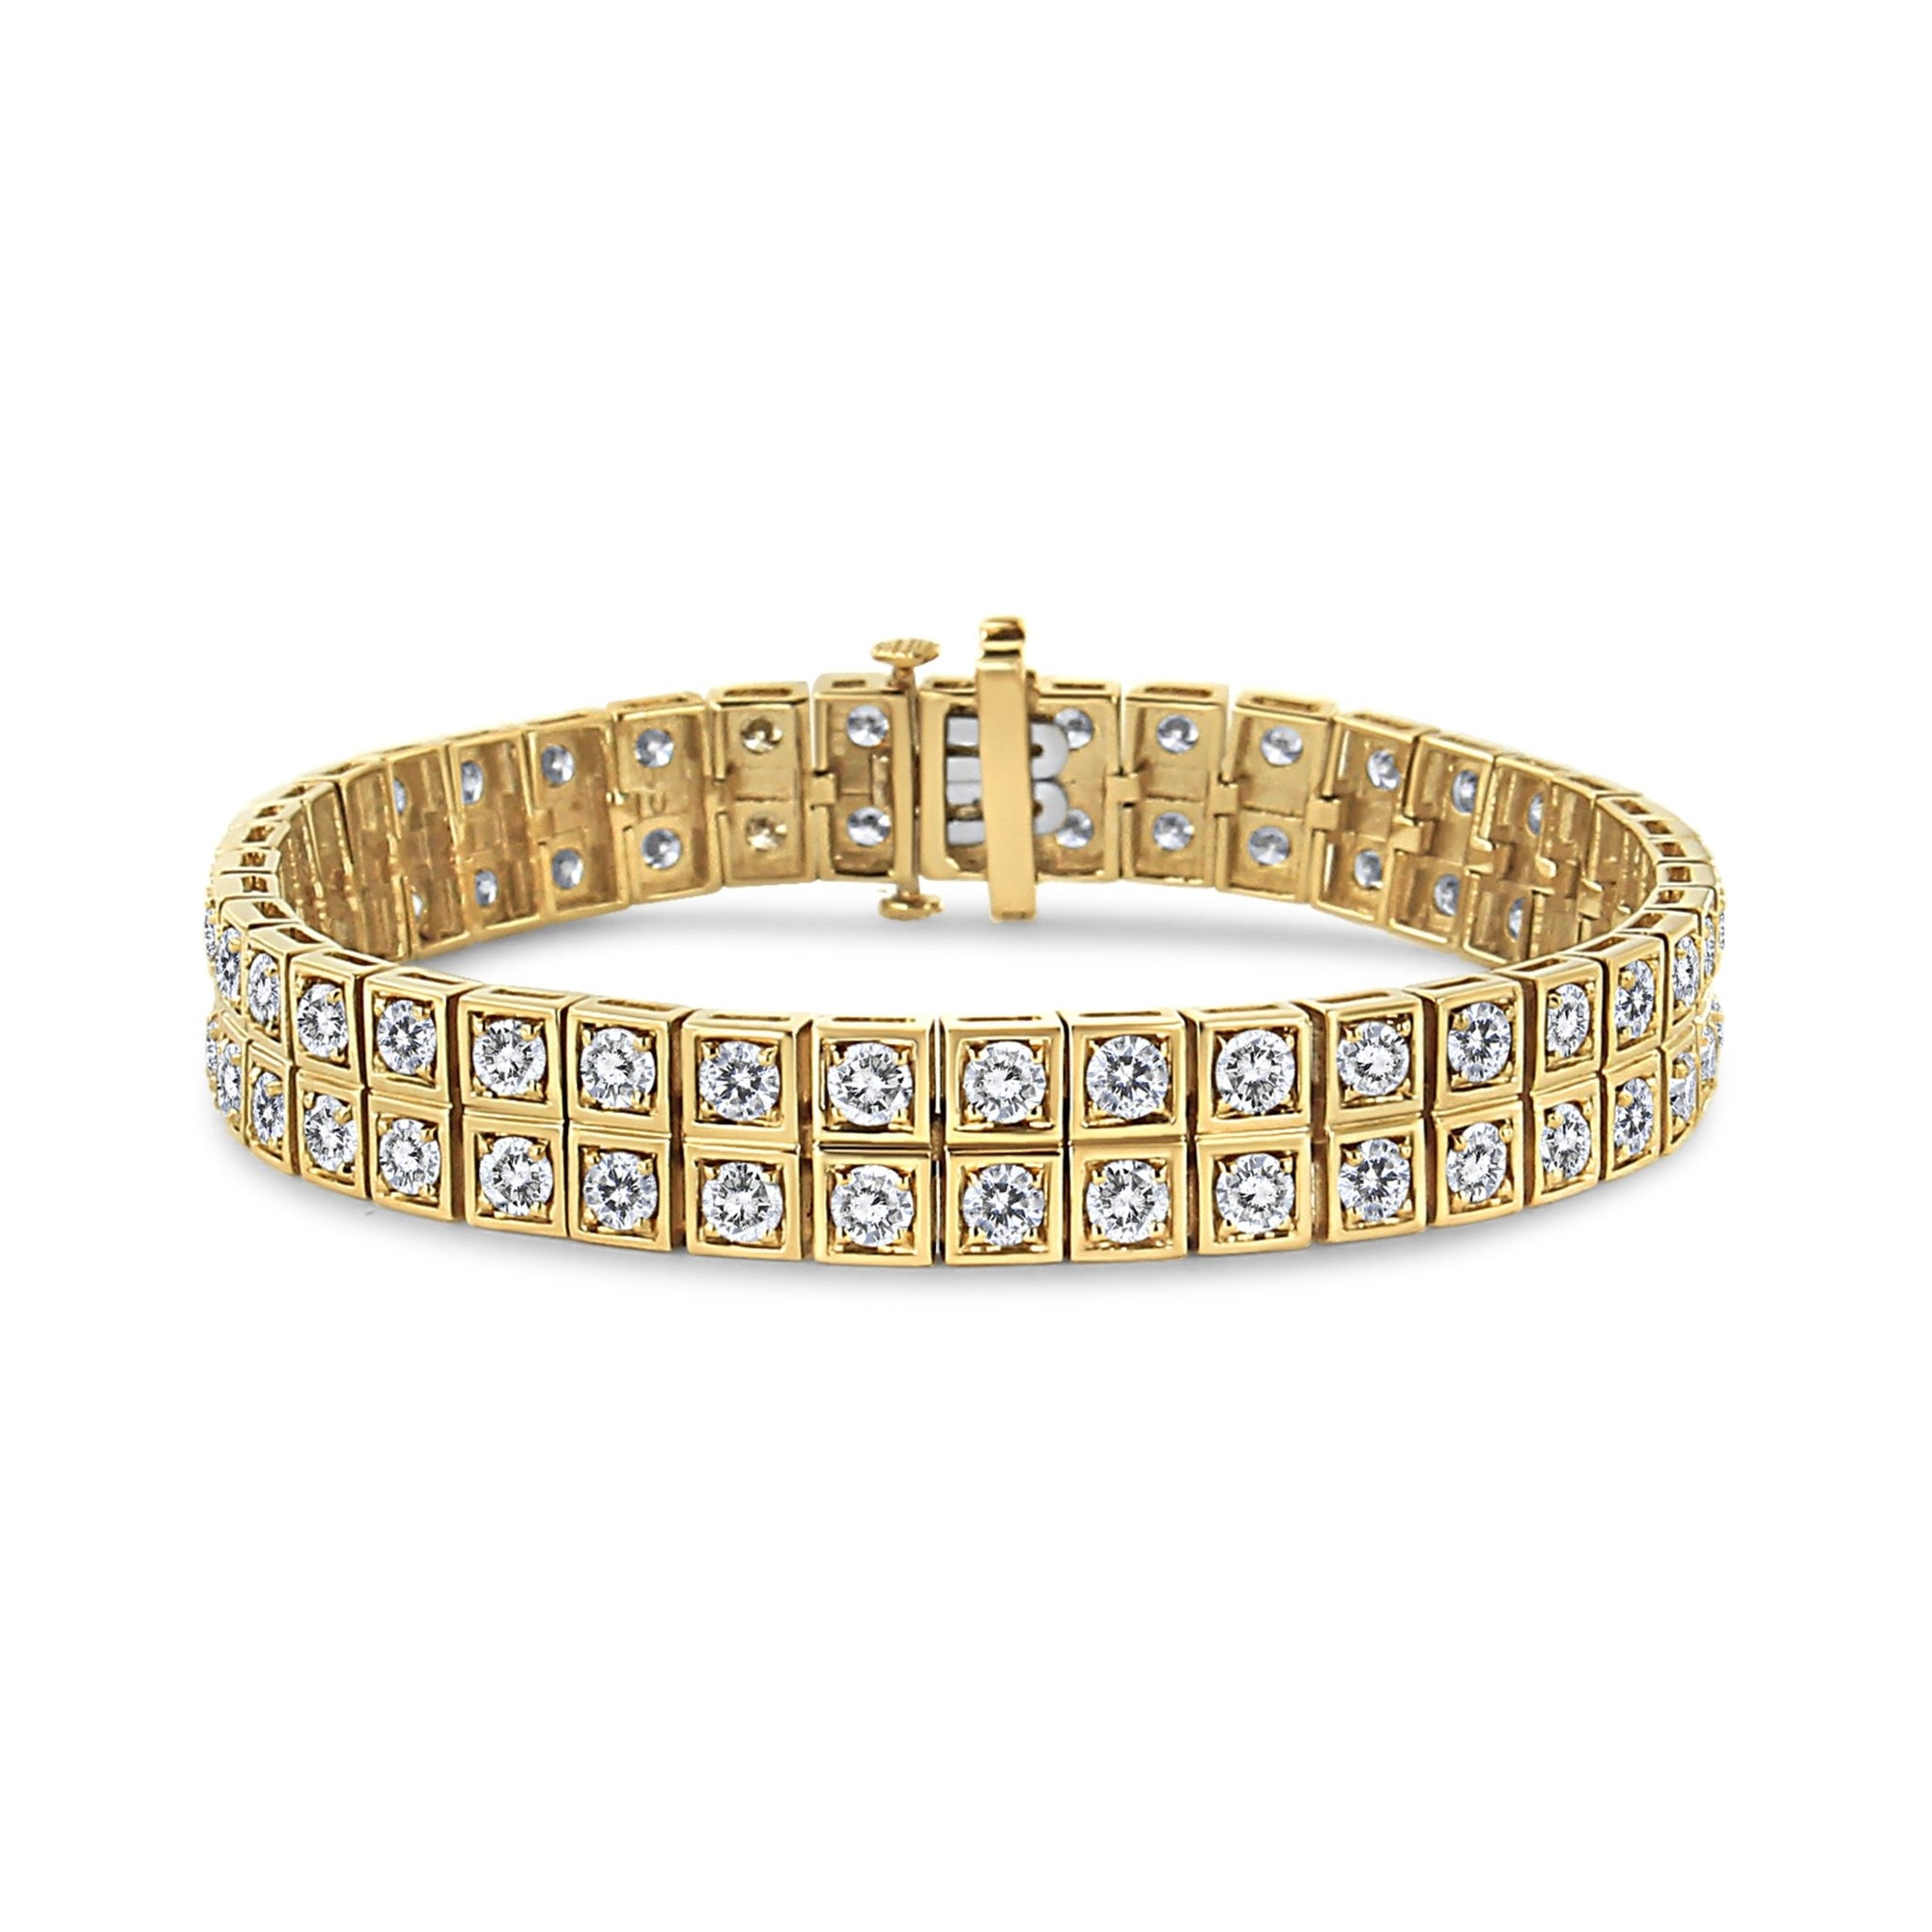 10K Yellow Gold 8.00 Cttw Round-Cut Diamond Two Row Square Link Tennis Bracelet (K-L Color, I1-I2 Clarity) - 7.25" Inches - LinkagejewelrydesignLinkagejewelrydesign